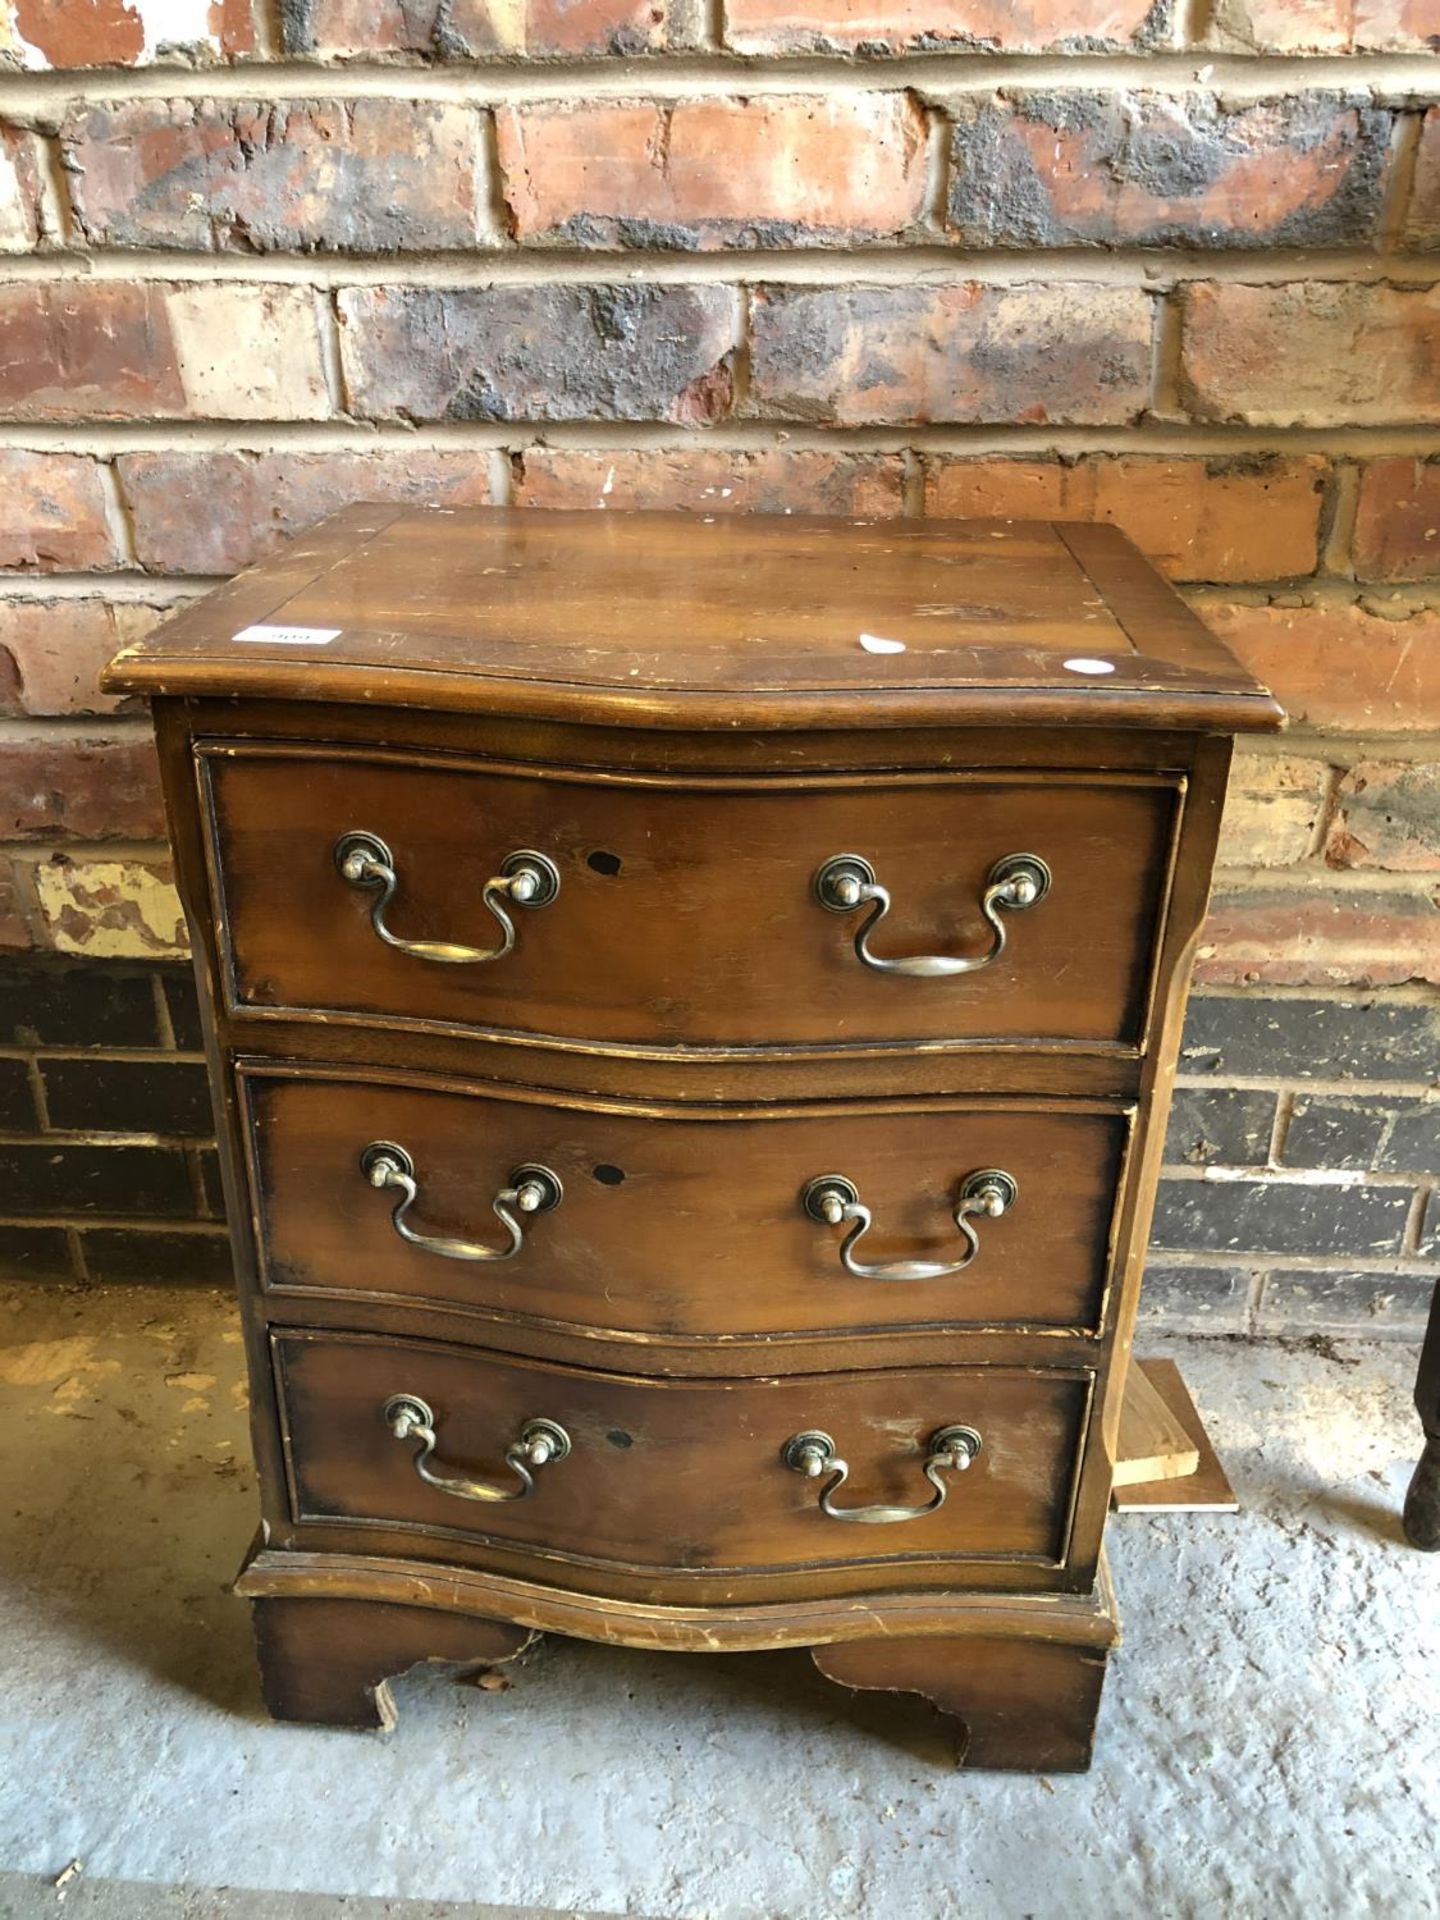 A SMALL WOODEN CHEST OF DRAWERS WITH DROP METAL HANDLES